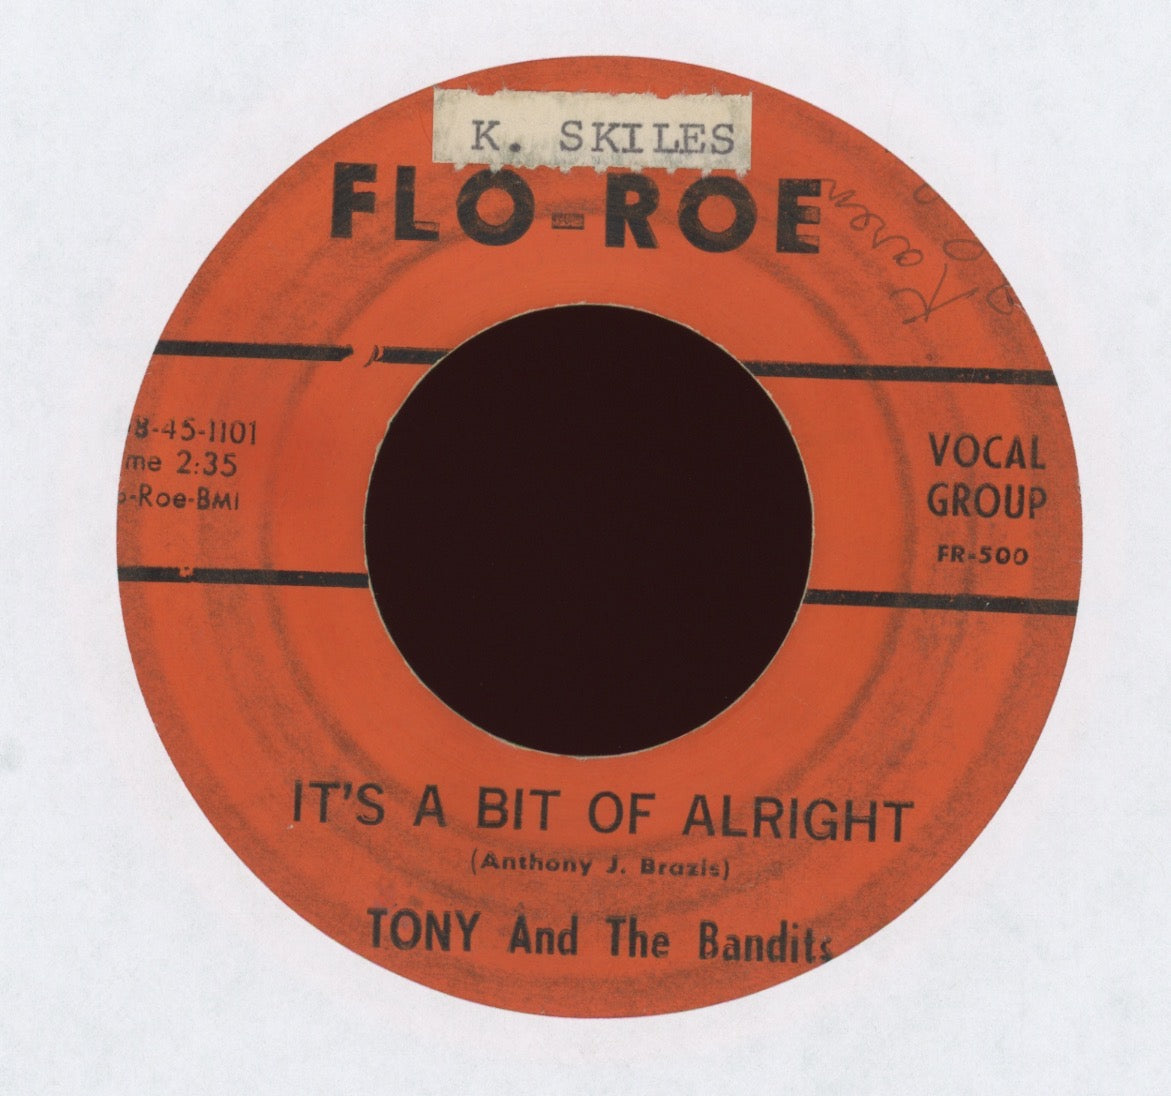 Tony And The Bandits - It's A Bit Of Alright on Flo-Roe Garage 45